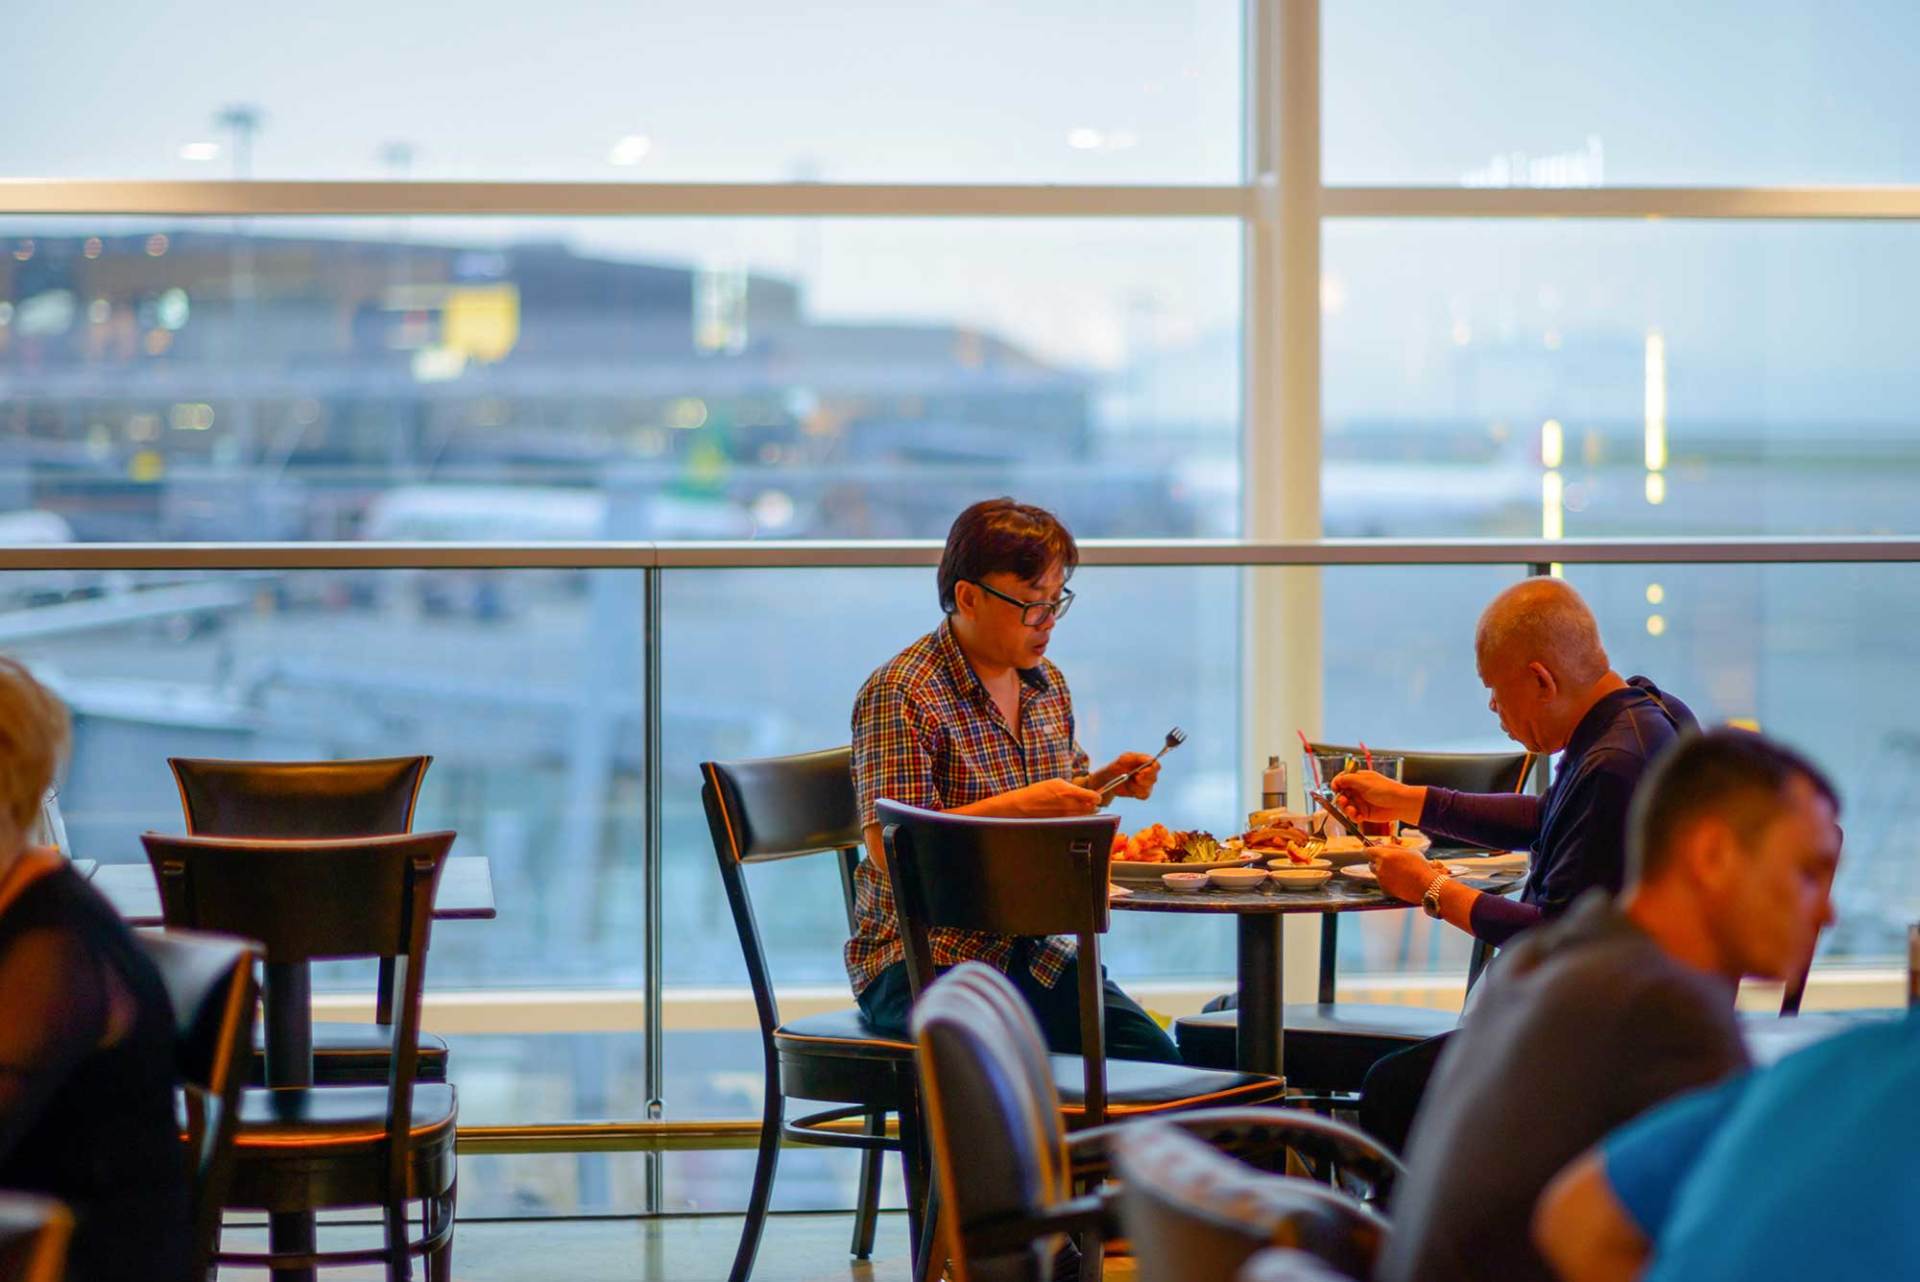 People eating at an airport